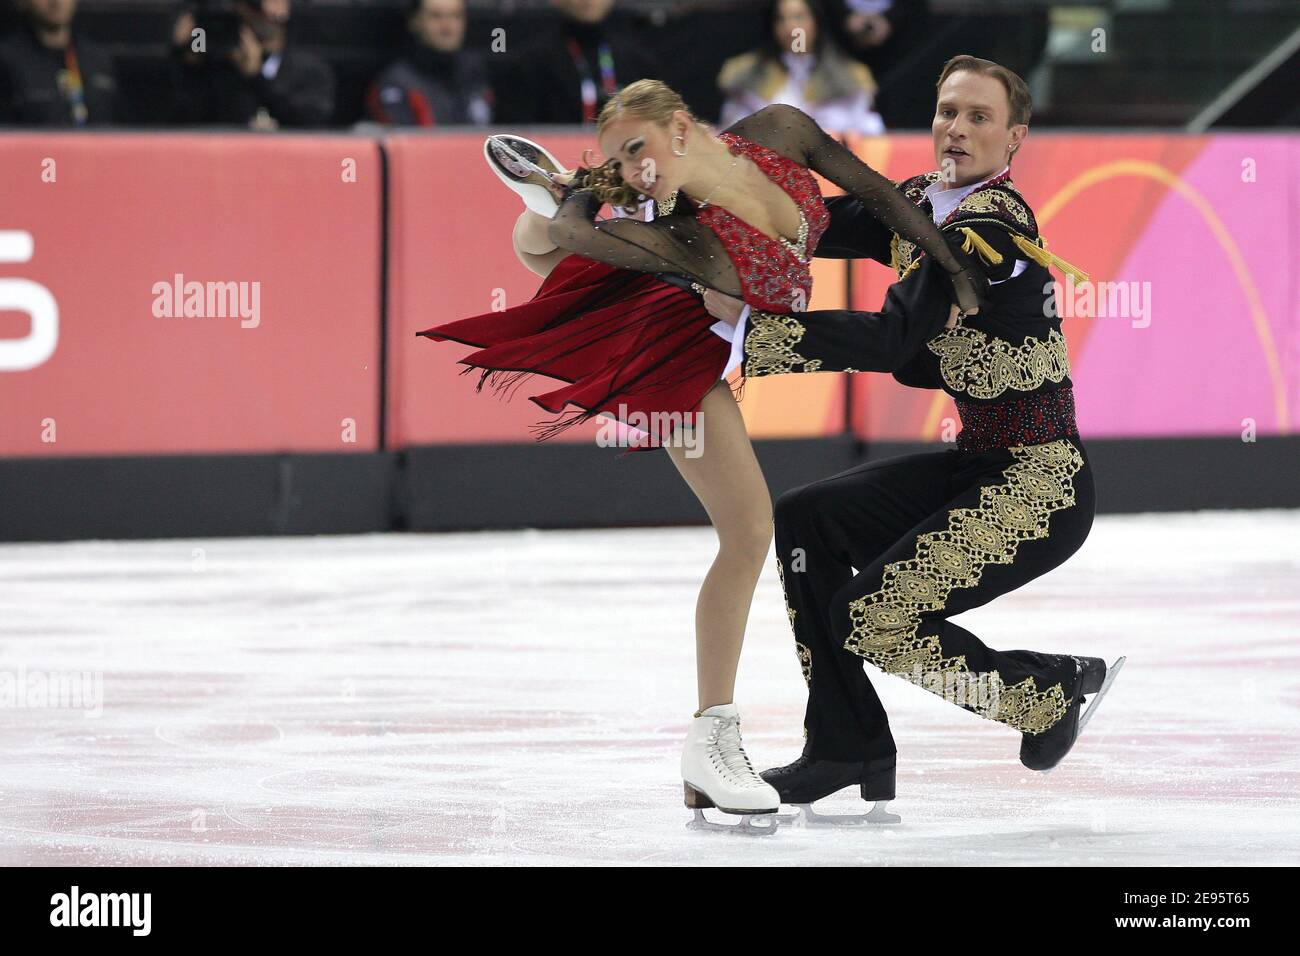 Russia's gold medal Tatiana Navka and Roman Kostomargov perform in the original dance program in Figure Skating Ice Dancing at the Turin 2006 Winter Olympic Games in Palavela, Turin, Italy on February 20, 2006. The XX Olympic Winter Games run from February 10 to February 26, 2006. Photo by Gouhier-Nebinger/Cameleon/ABACAPRESS.COM Stock Photo